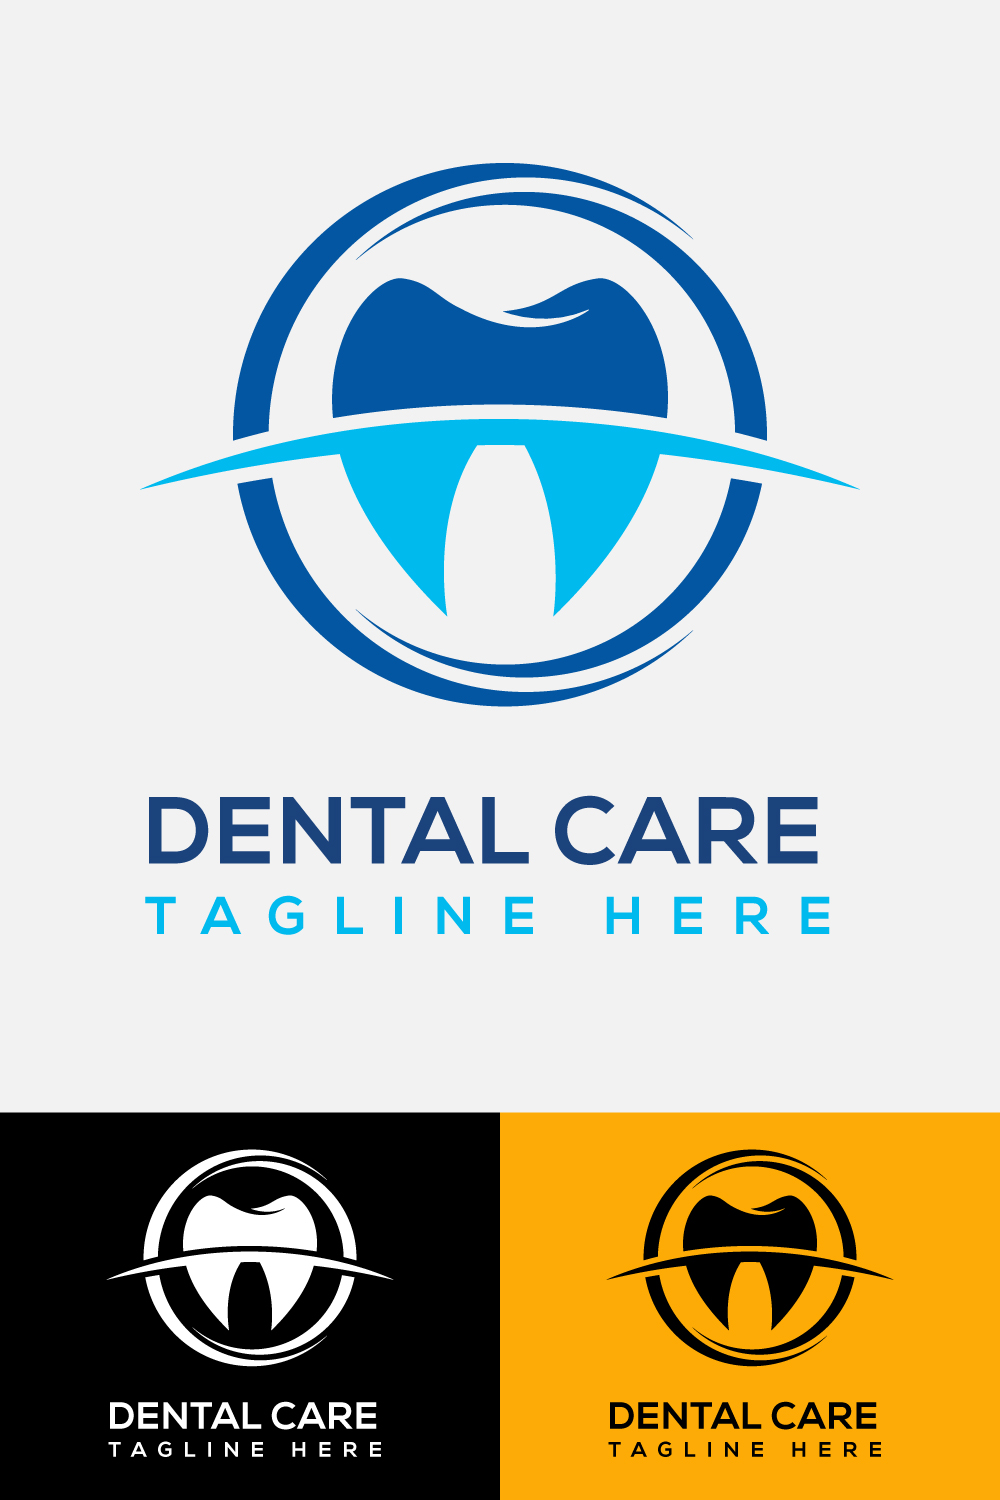 Collection of images of beautiful logos in the form of a tooth shape.